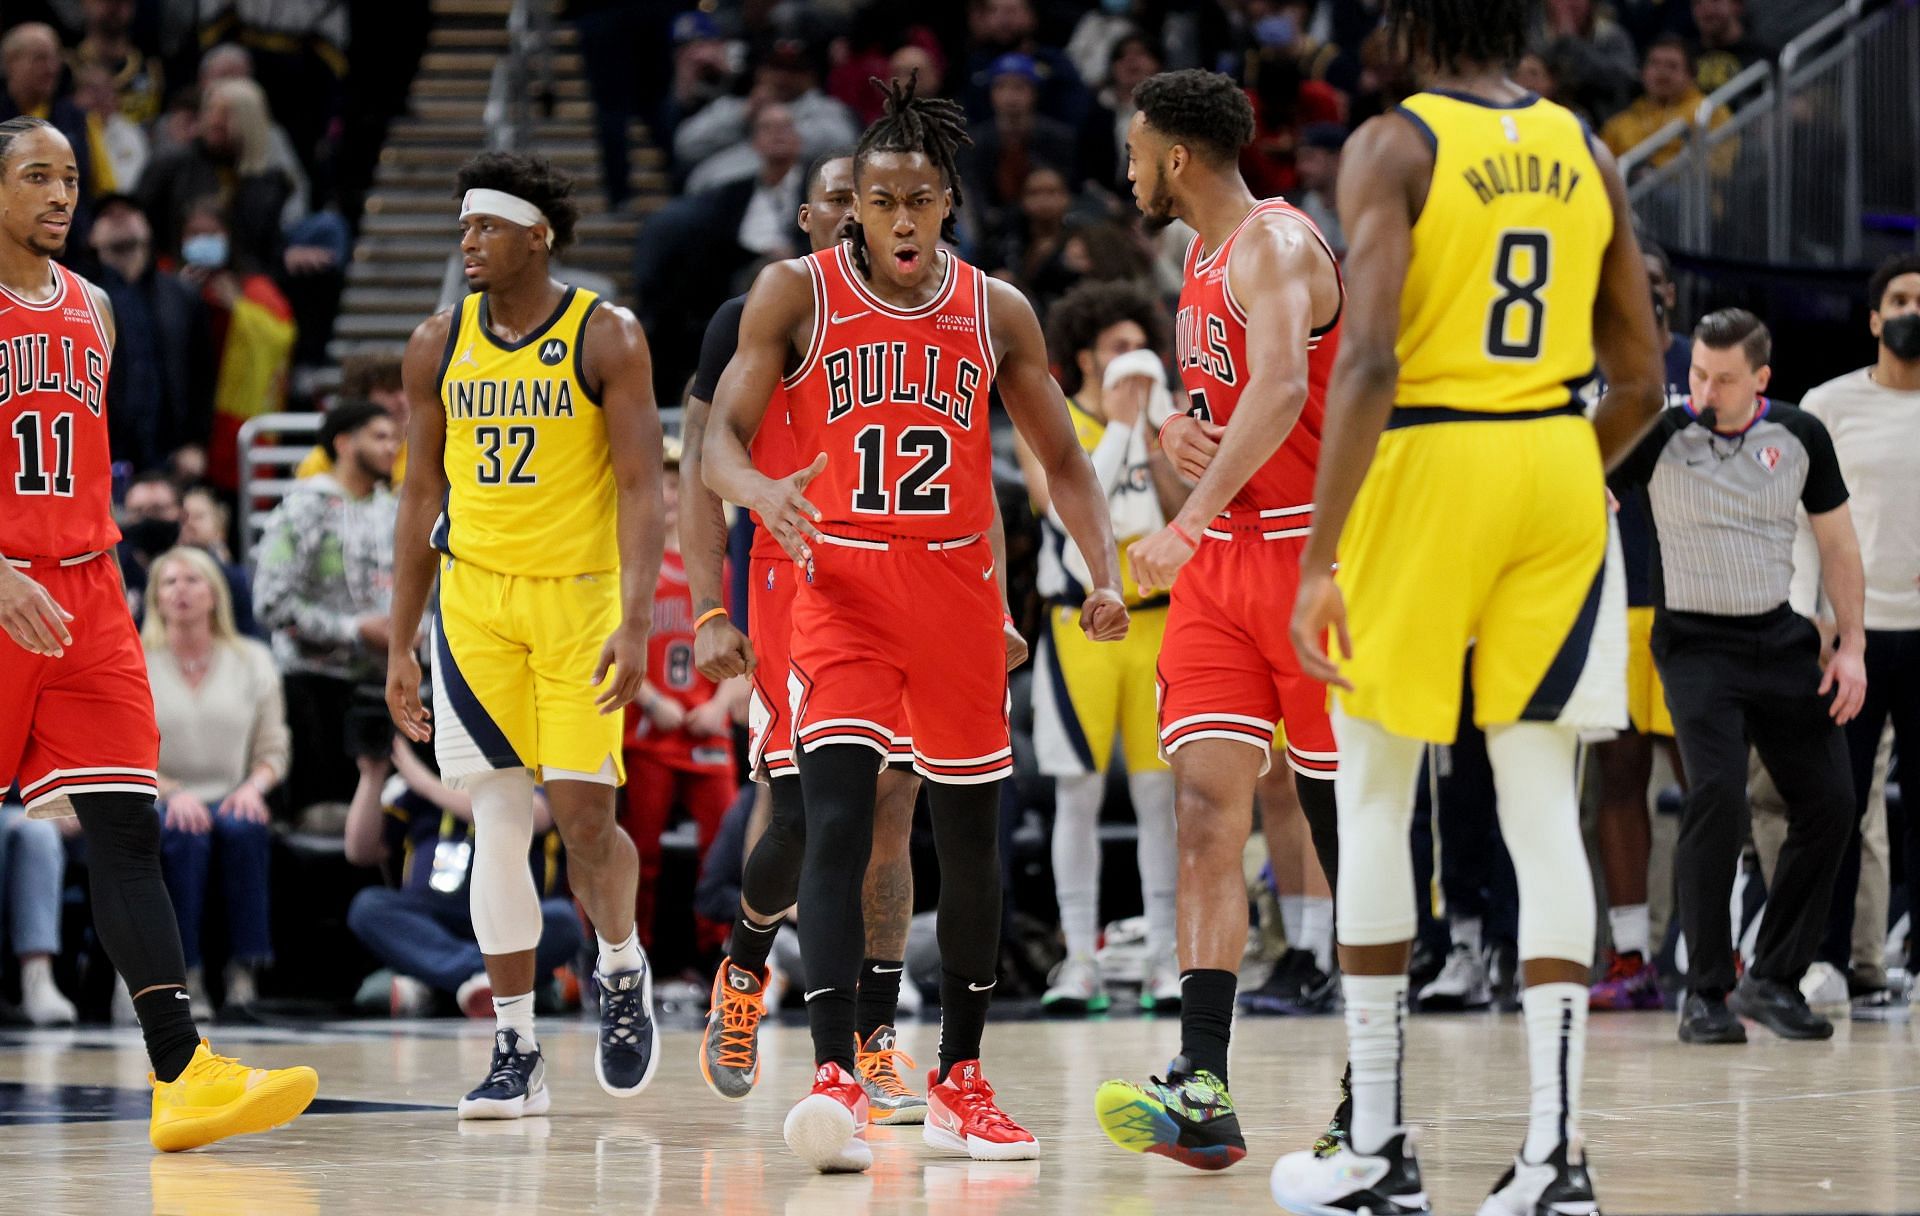 The Bulls against the Indiana Pacers